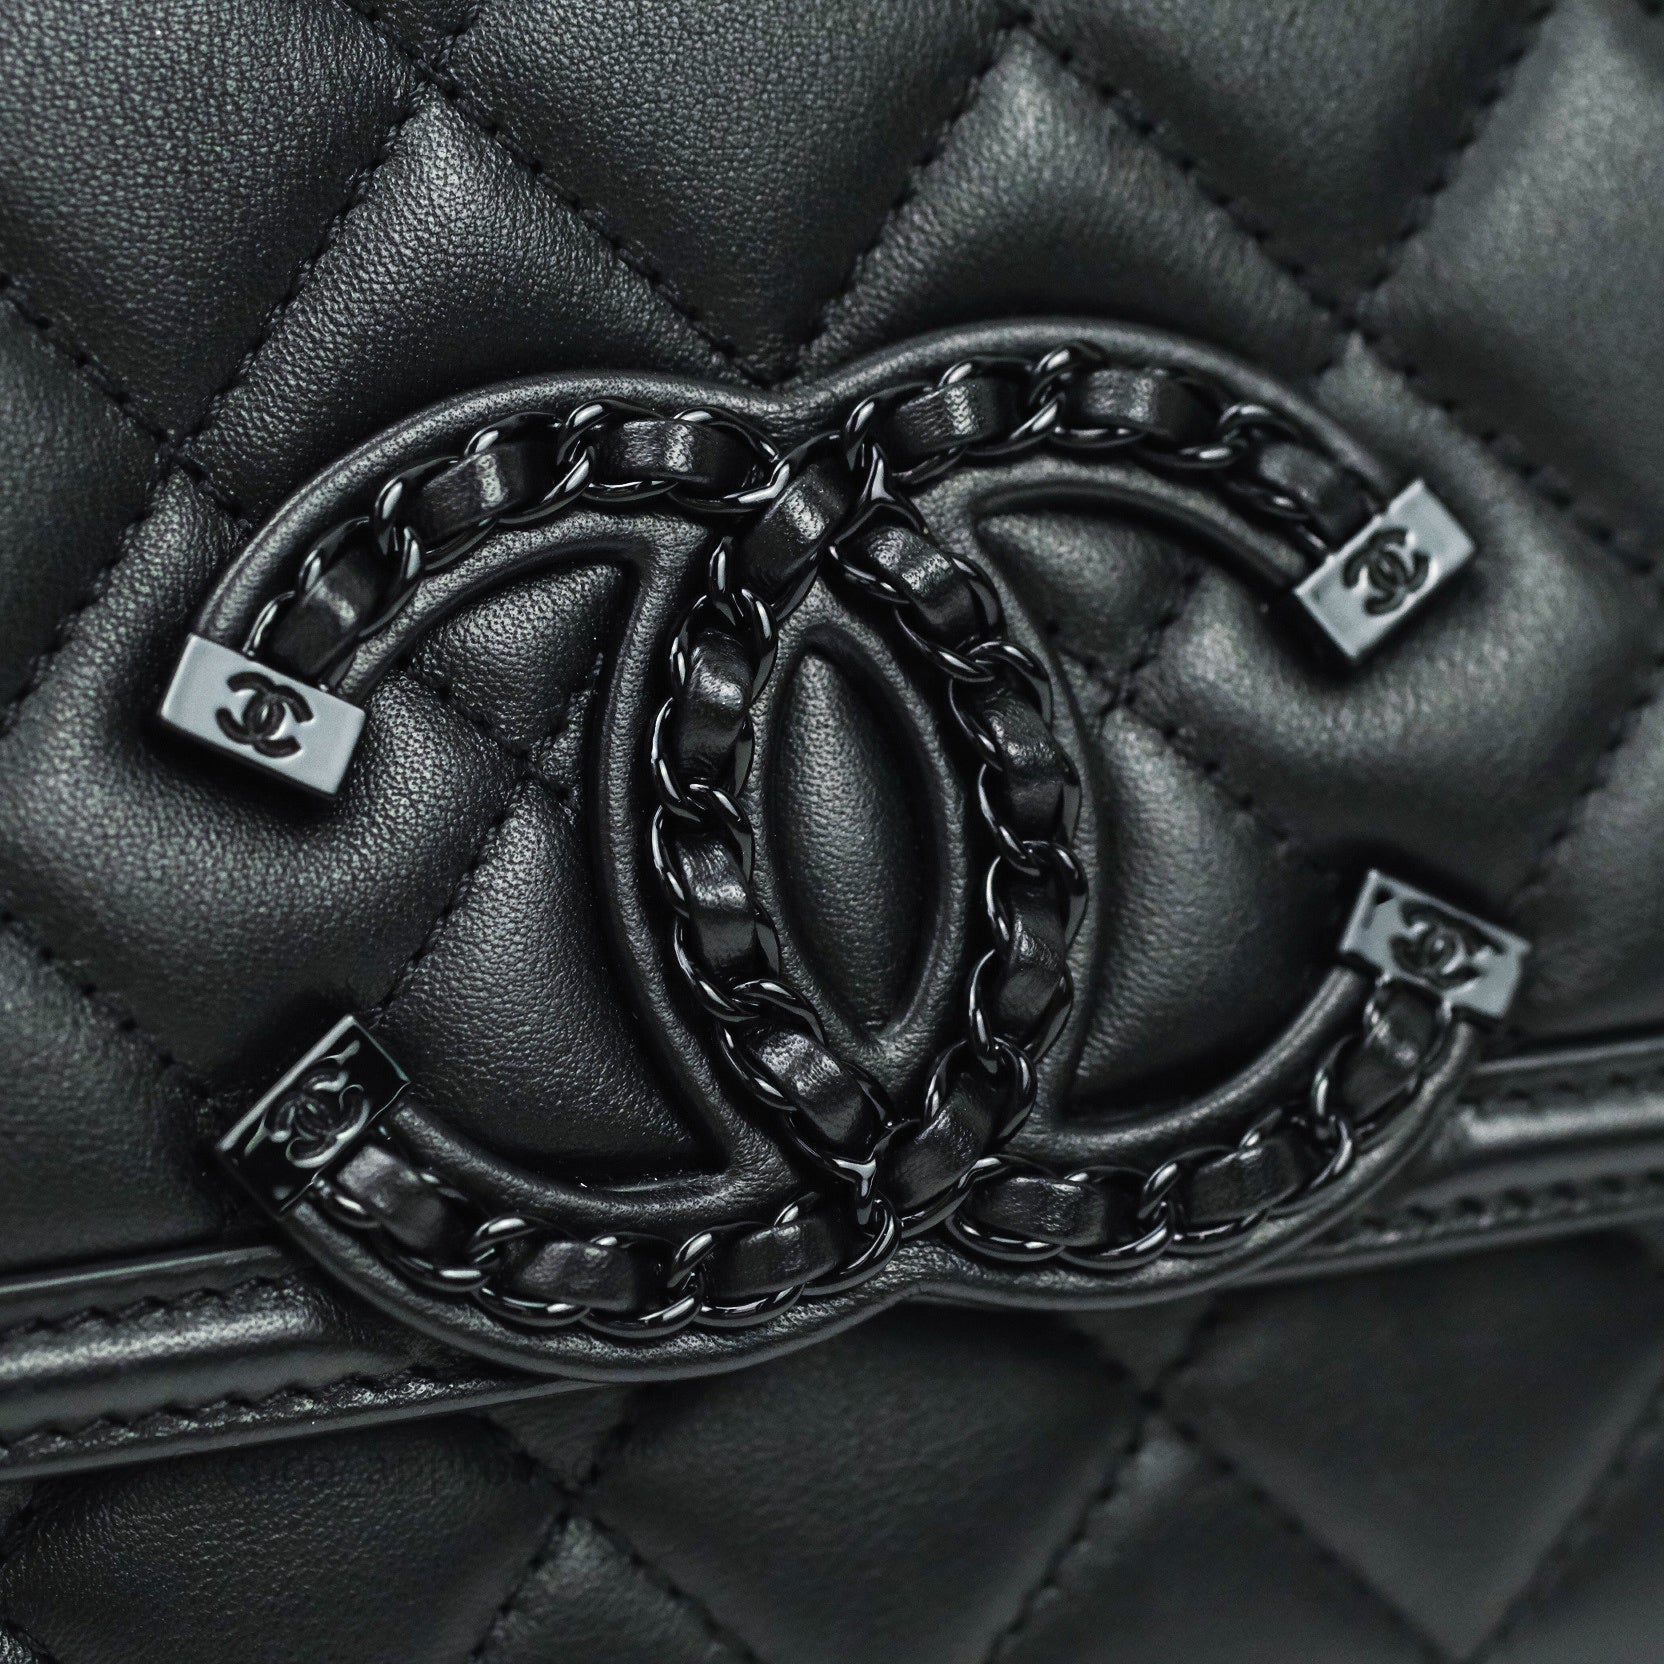 Chanel Quilted Small CC Filigree Flap Black Lambskin So Black